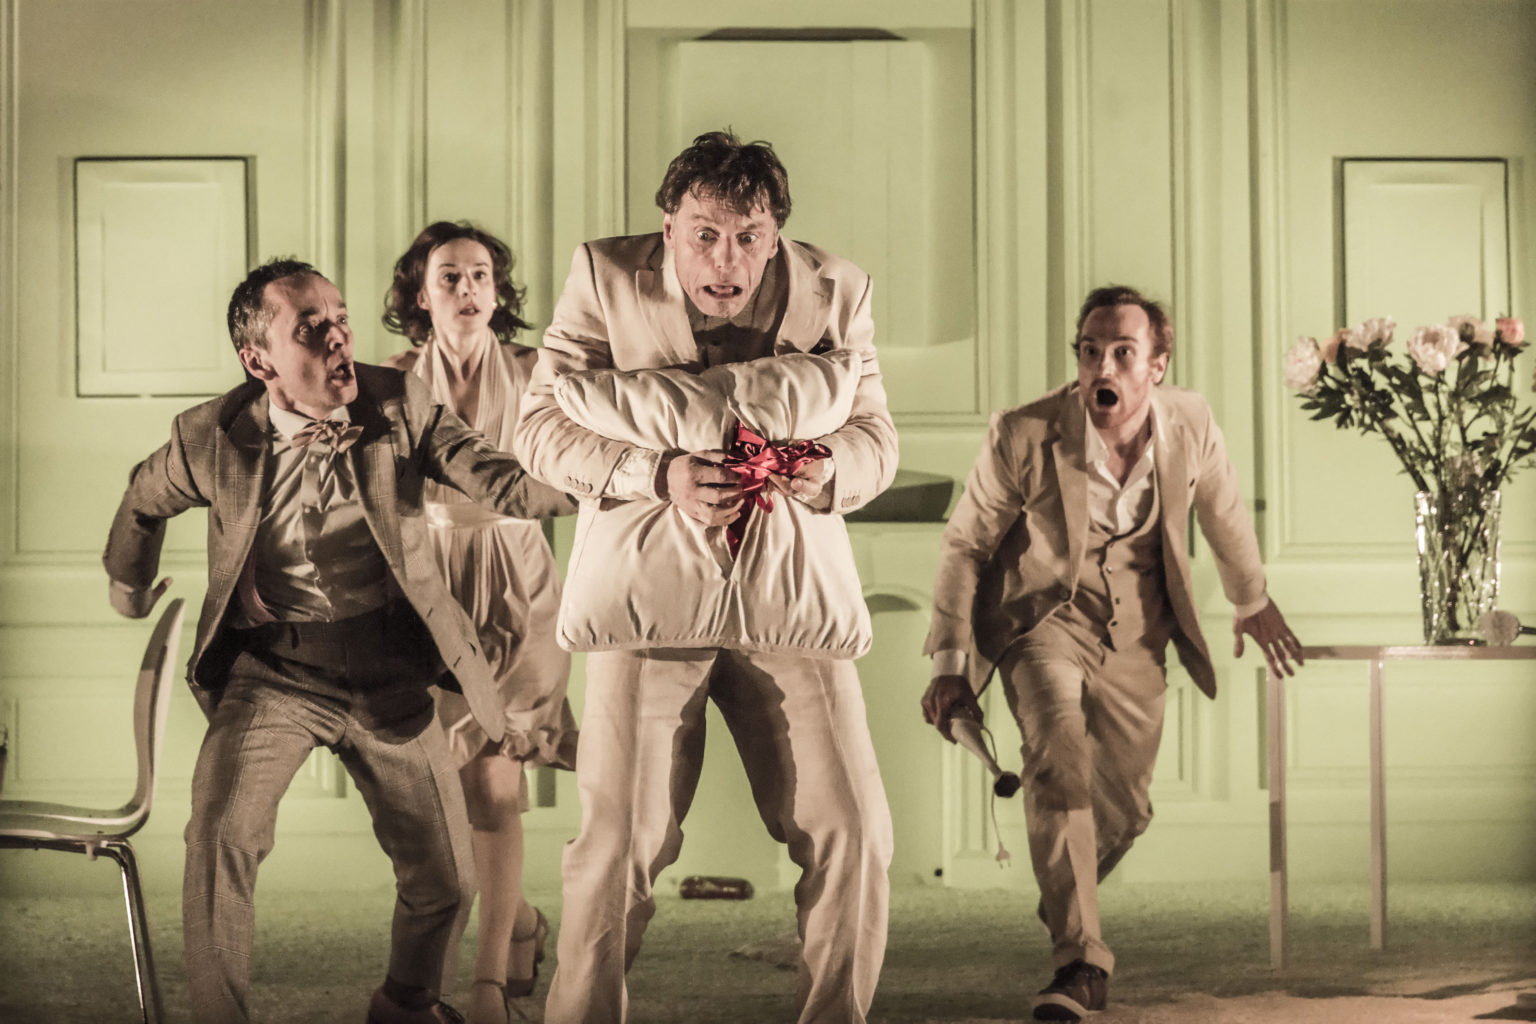 Watch the trailer for Cheek by Jowl’s 2014-2016 production of Ubu Roi by Alfred Jarry